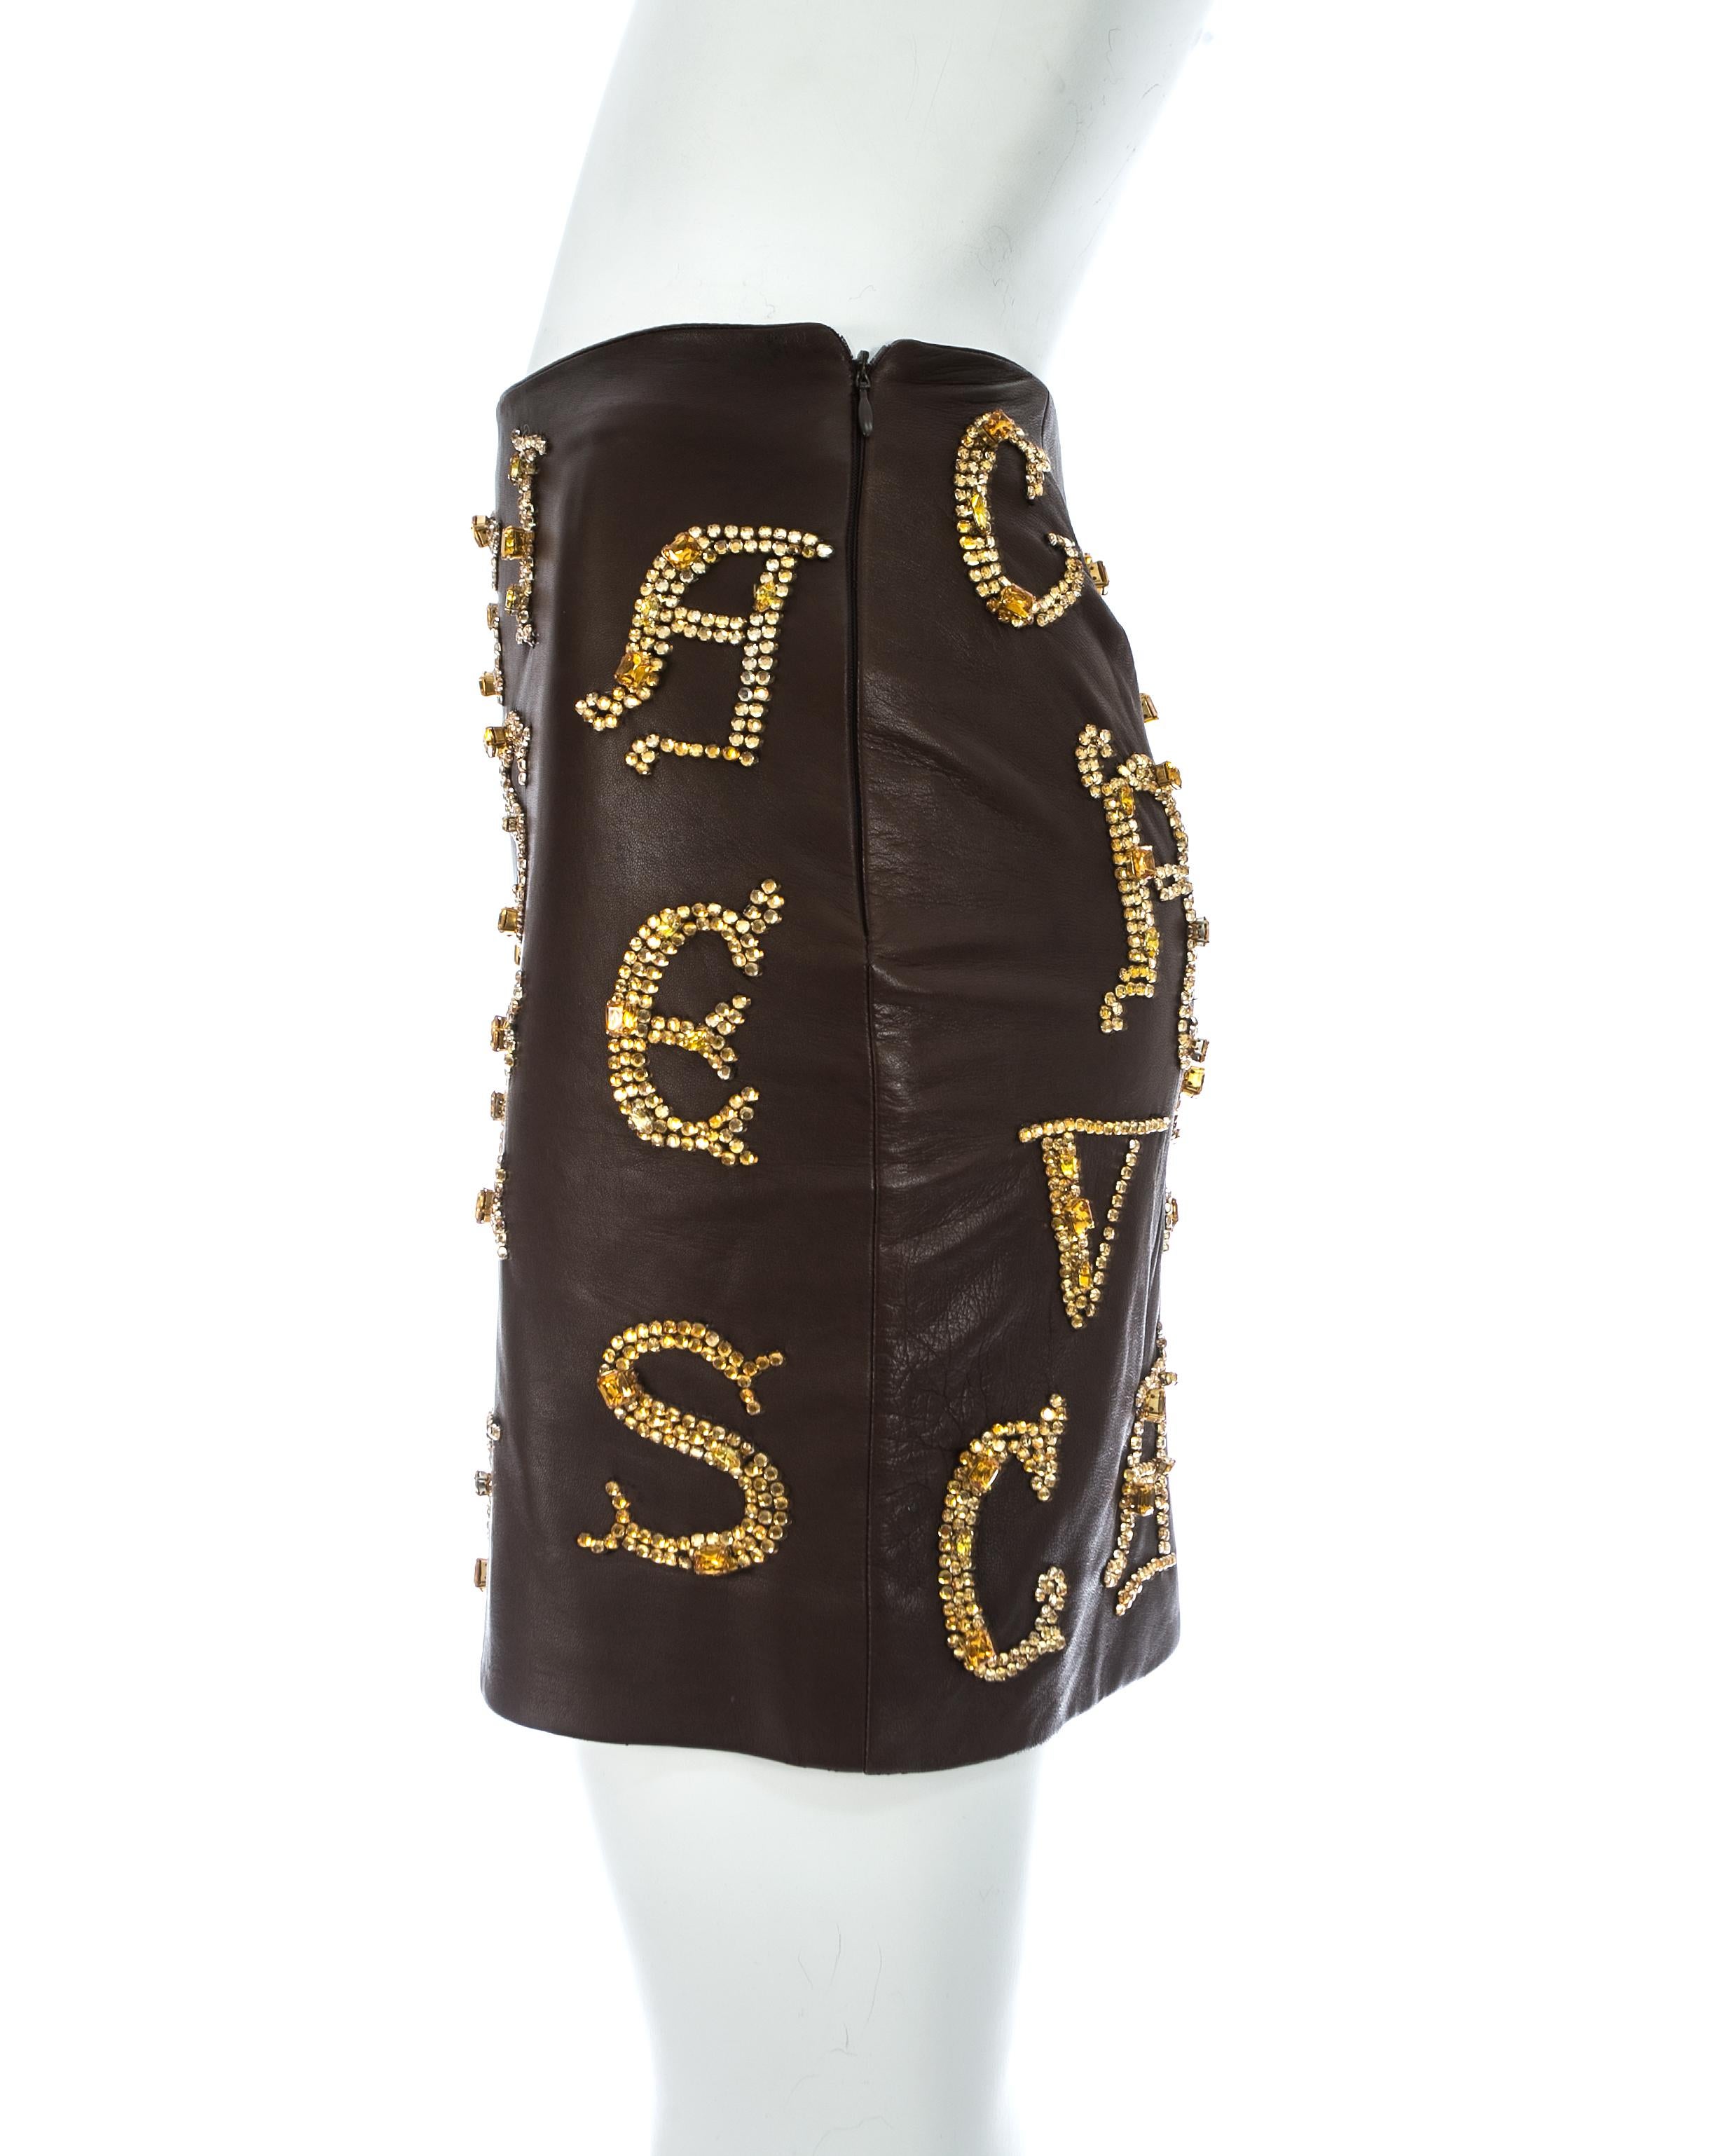 Gianni Versace brown leather skirt with gold crystal embellishment, fw 1997 For Sale 2